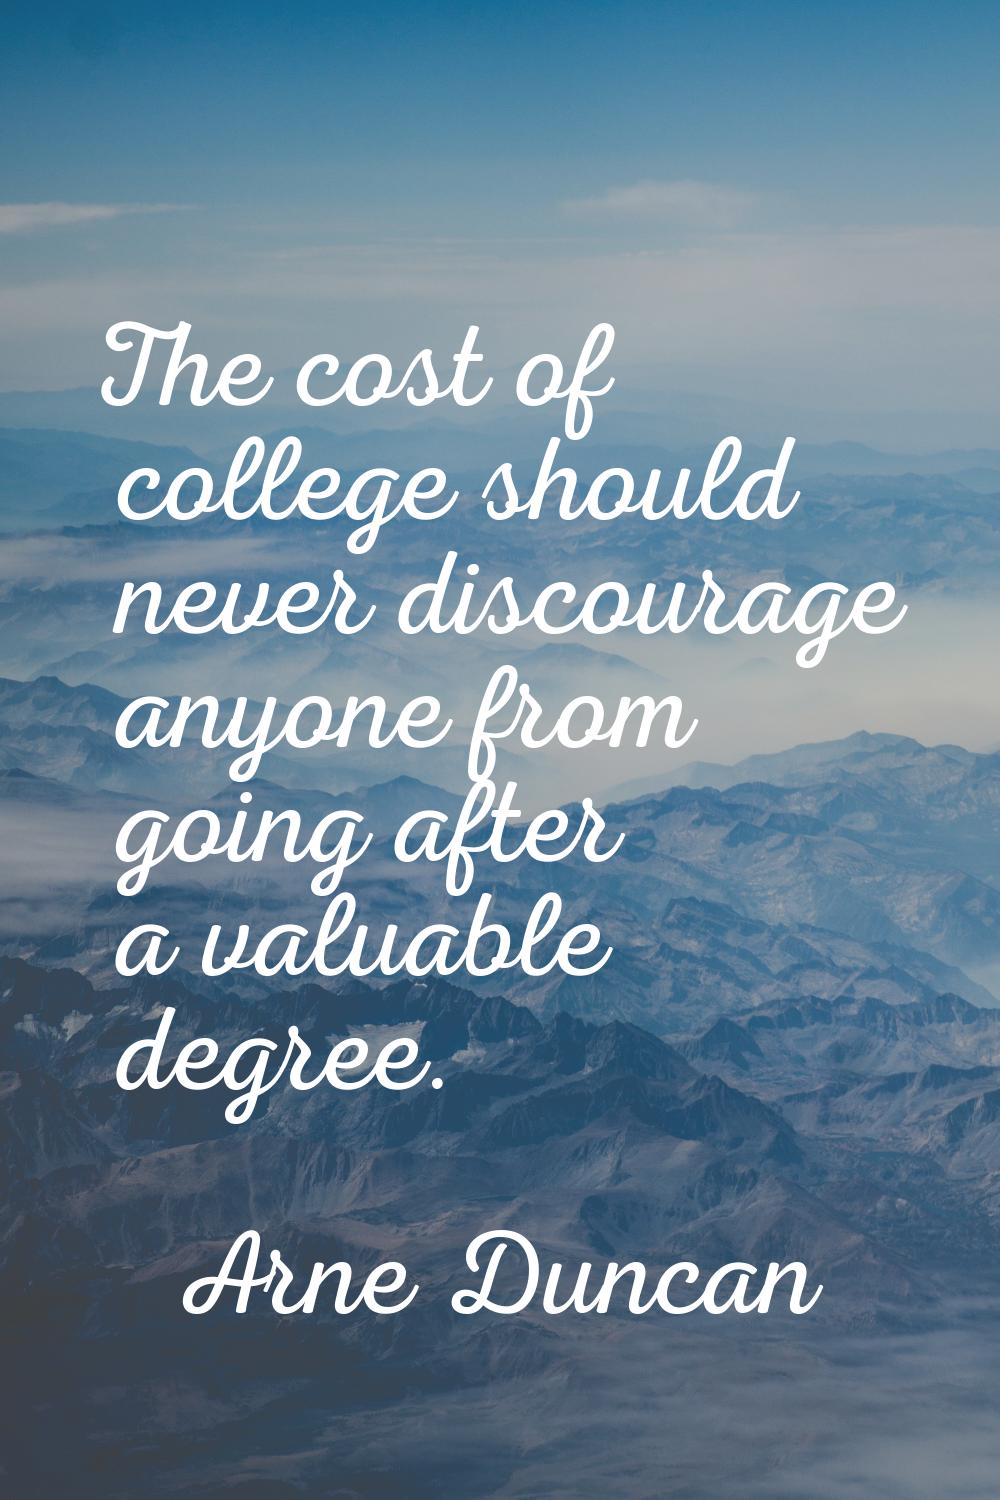 The cost of college should never discourage anyone from going after a valuable degree.